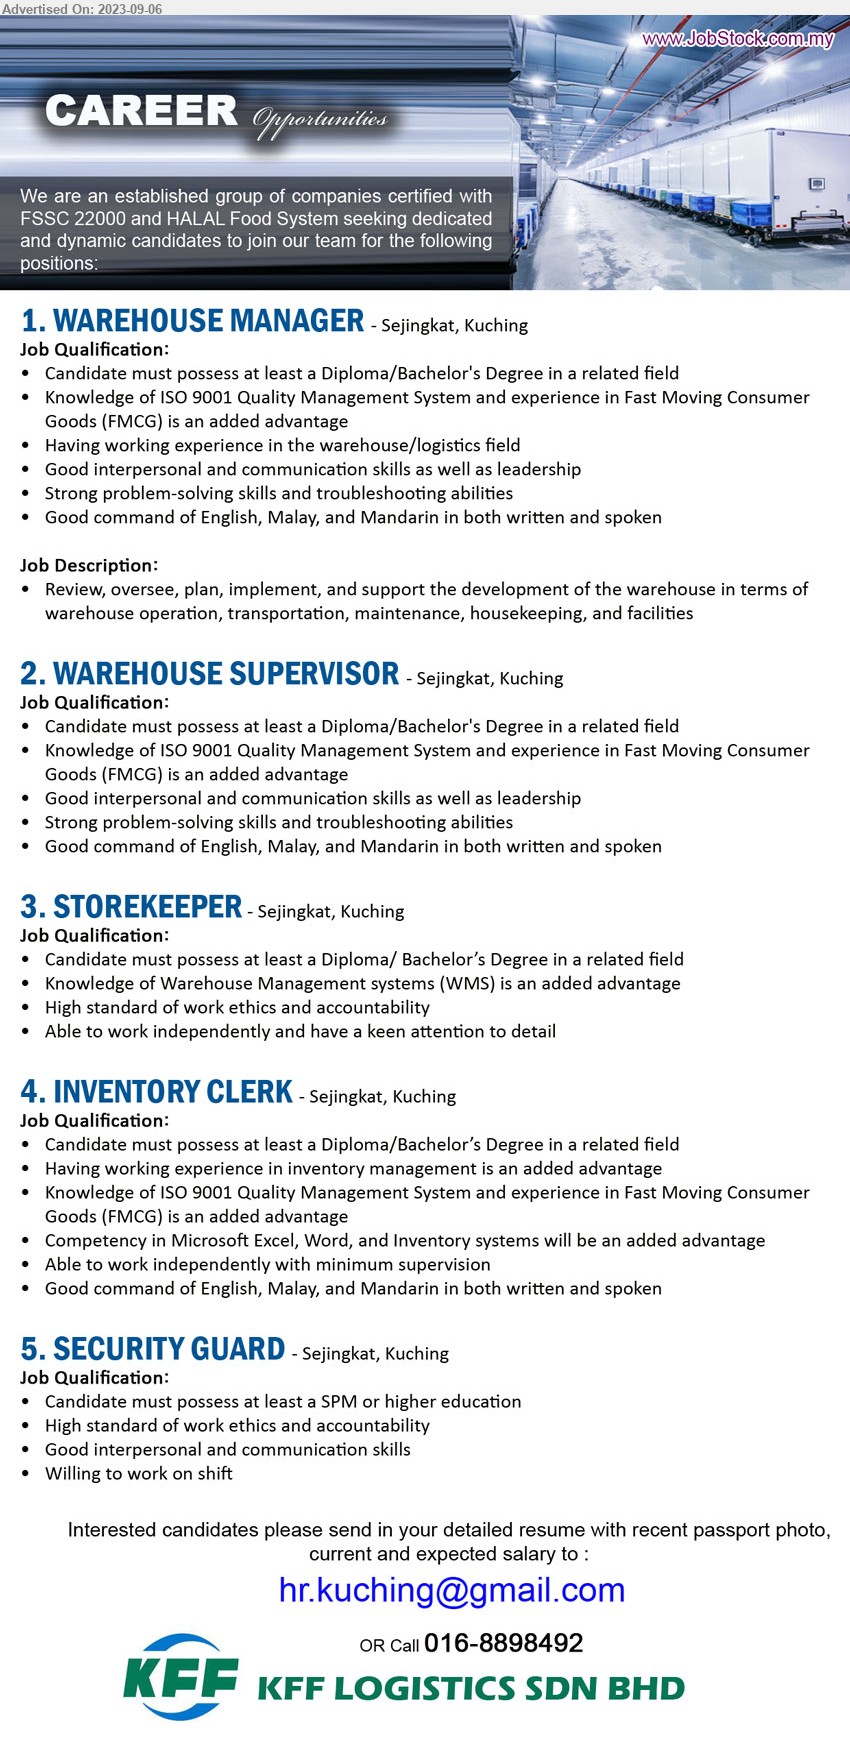 KFF LOGISTICS SDN BHD - 1. WAREHOUSE MANAGER  (Kuching), Diploma/Bachelor's Degree, Knowledge of ISO 9001 Quality Management System and experience in FMCG,...
2. WAREHOUSE SUPERVISOR (Kuching),  Diploma/Bachelor's Degree, knowledge of ISO 9001 Quality Management System and experience in FMCG,...
3. STOREKEEPER  (Kuching), Diploma/ Bachelor’s Degree, Knowledge of Warehouse Management systems (WMS) ,...
4. INVENTORY CLERK (Kuching), Diploma/Bachelor’s Degree, Knowledge of ISO 9001 Quality Management System and experience in FMCG,...
5. SECURITY GUARD (Kuching), SPM, High standard of work ethics and accountability,...
Call 016-8898492  / Email resume to ...
